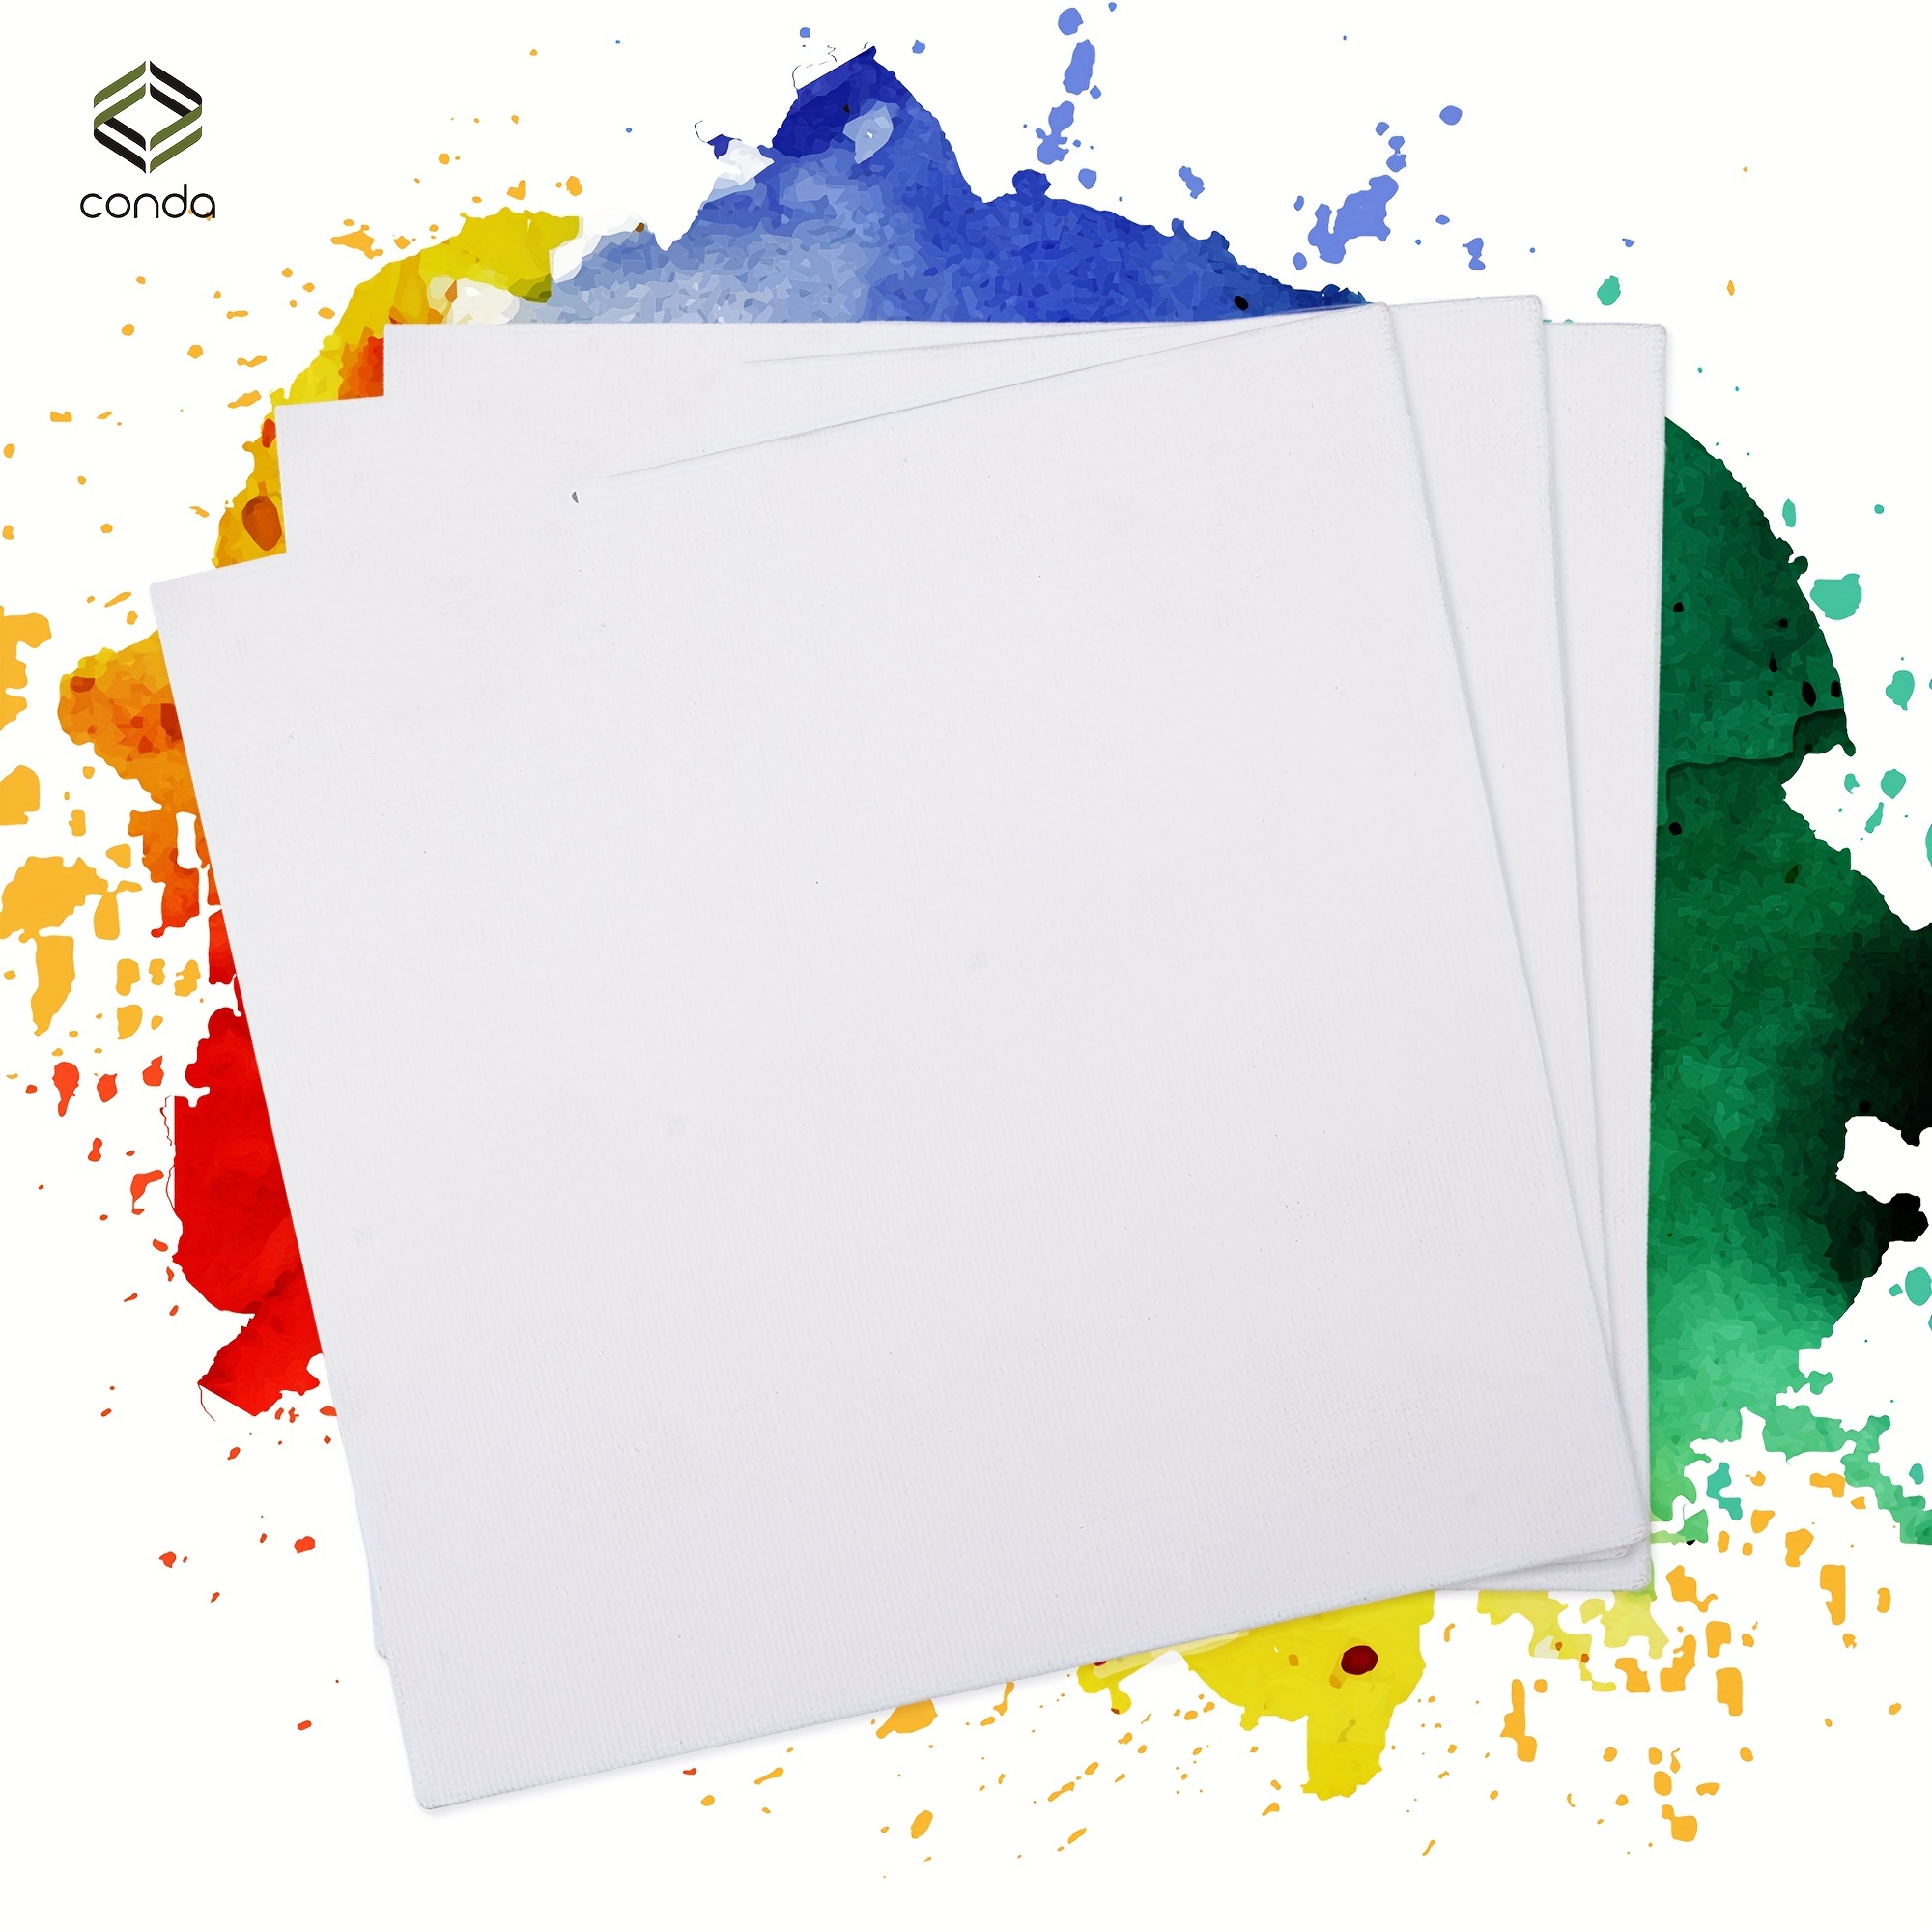 Conda Canvas Panels 8 x 10 inch, 24 Pack, Primed, 100% Cotton, Artist Quality Acid Free Canvas Board for Acrylic, Pouring & Oil Painting